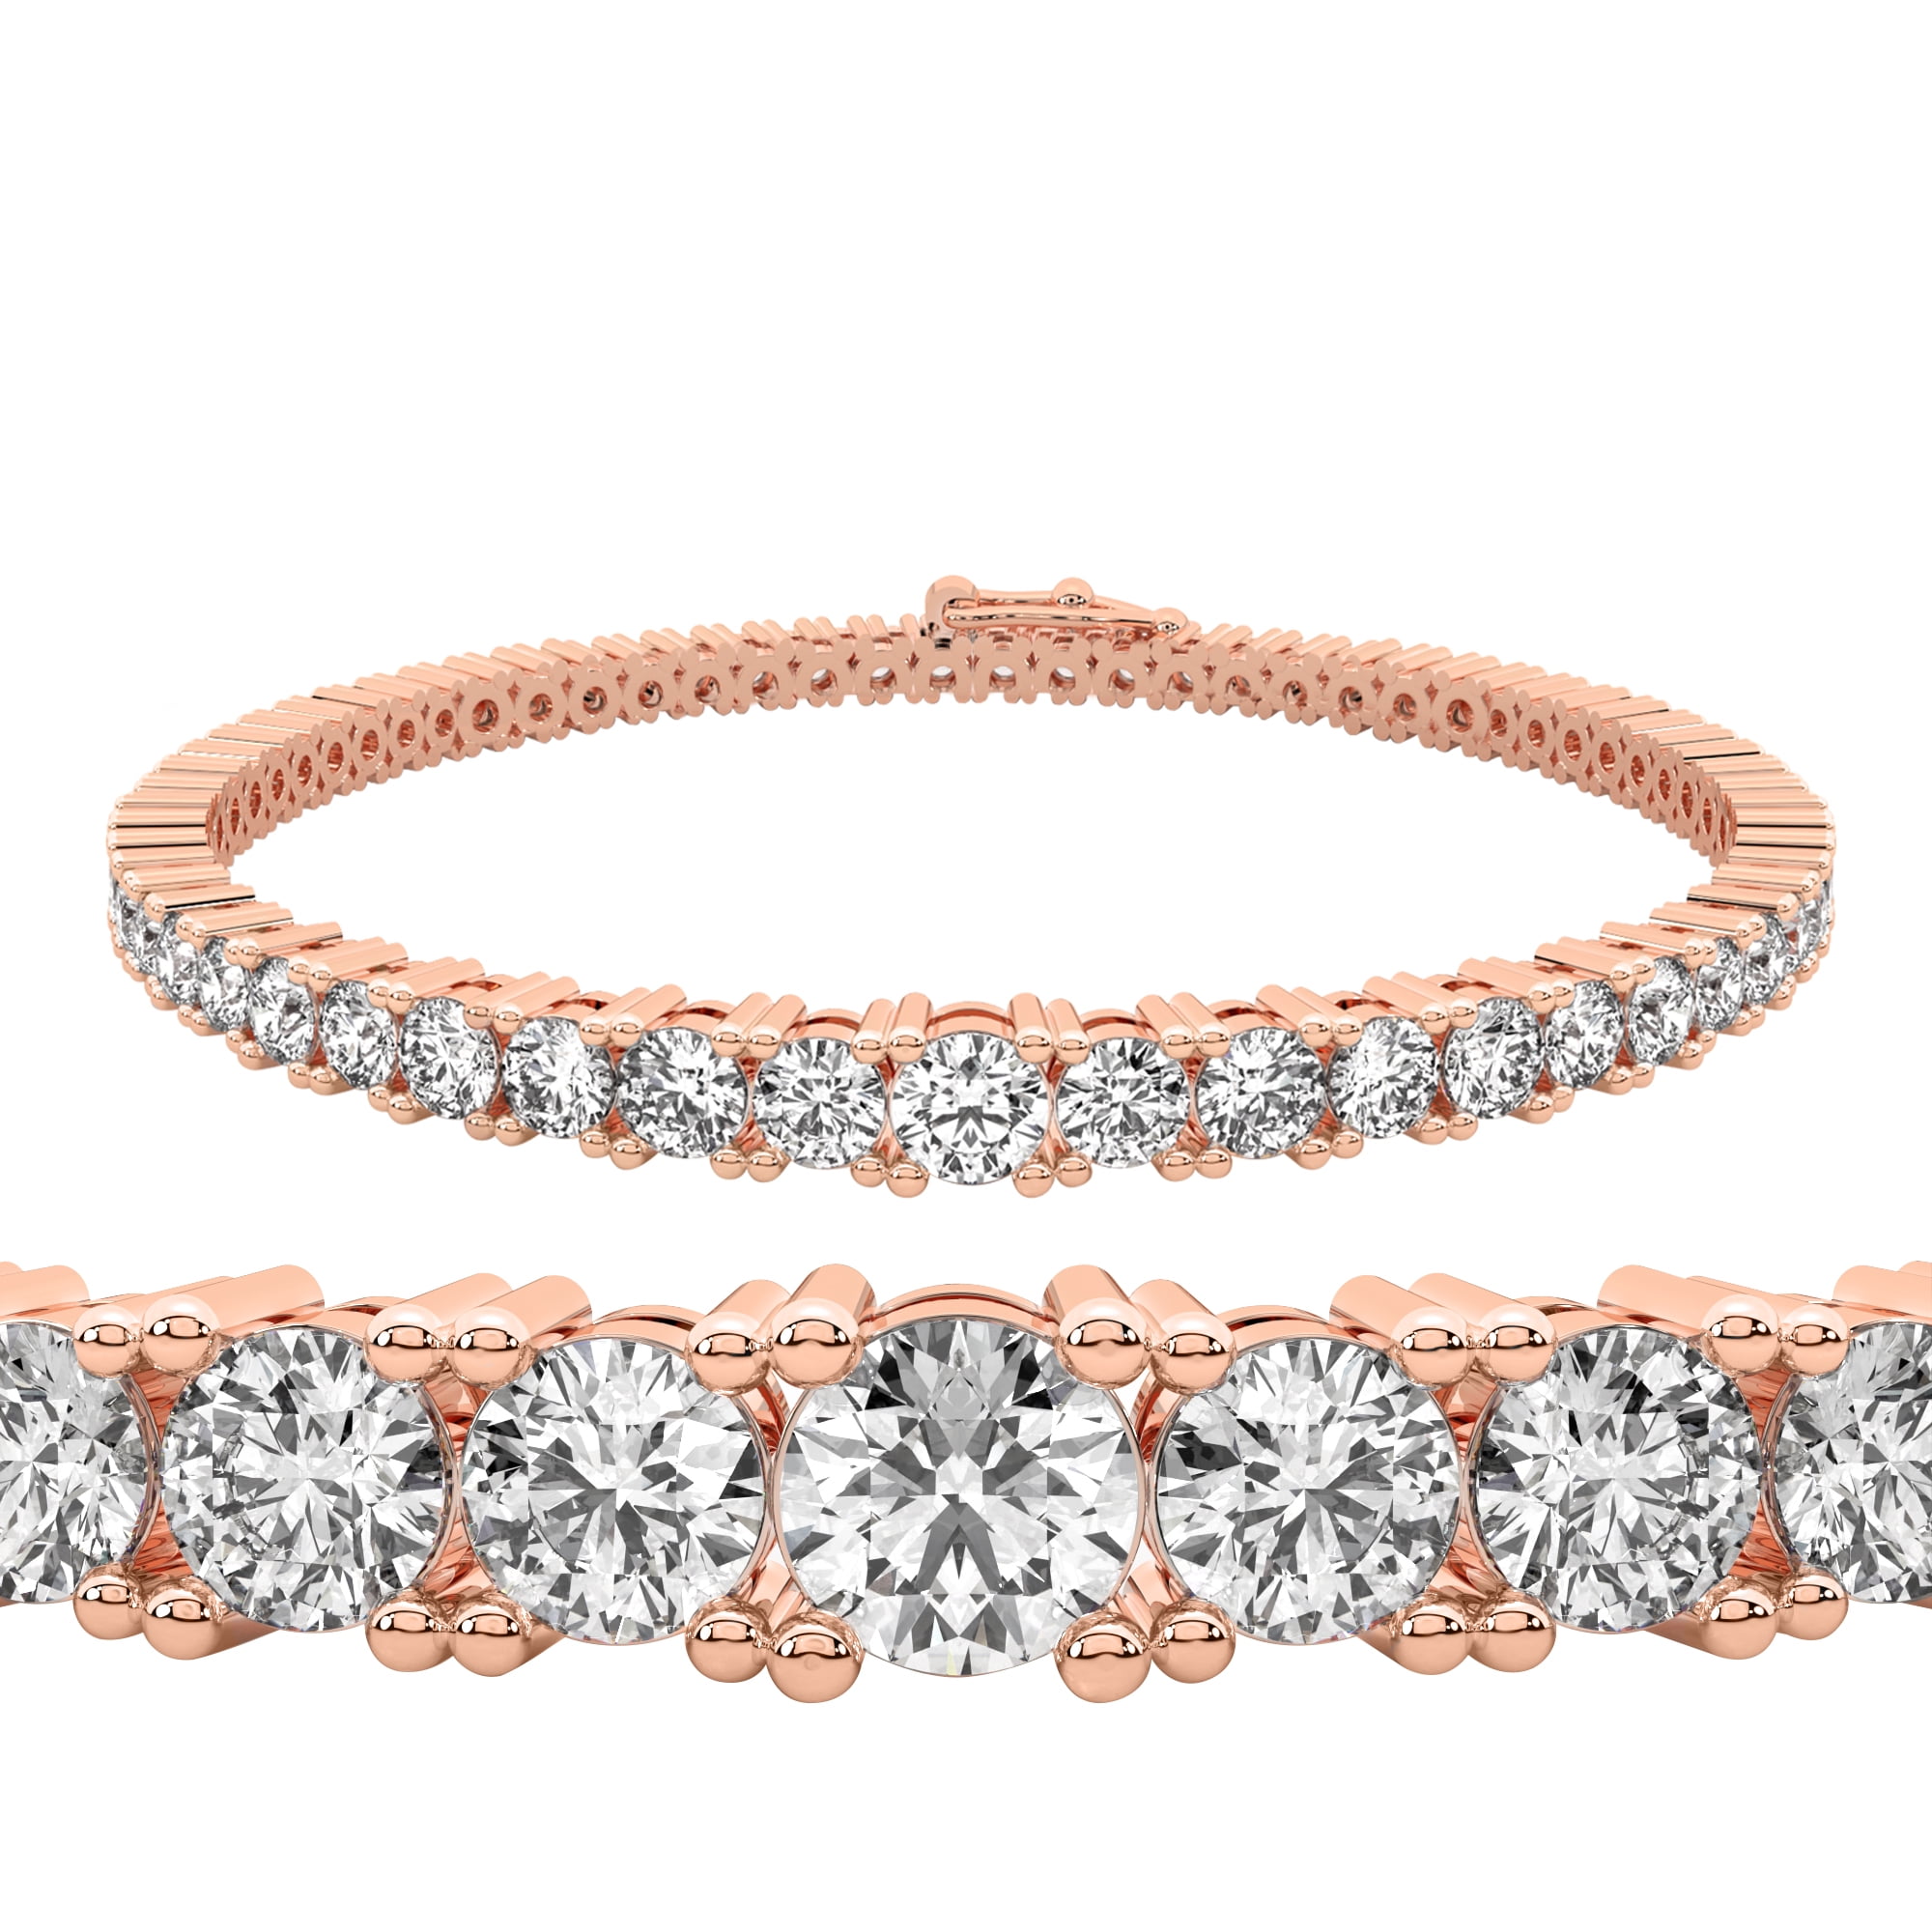 6 CT. T.W. Baguette and Round Diamond Tennis Bracelet in 14K White Gold |  Zales